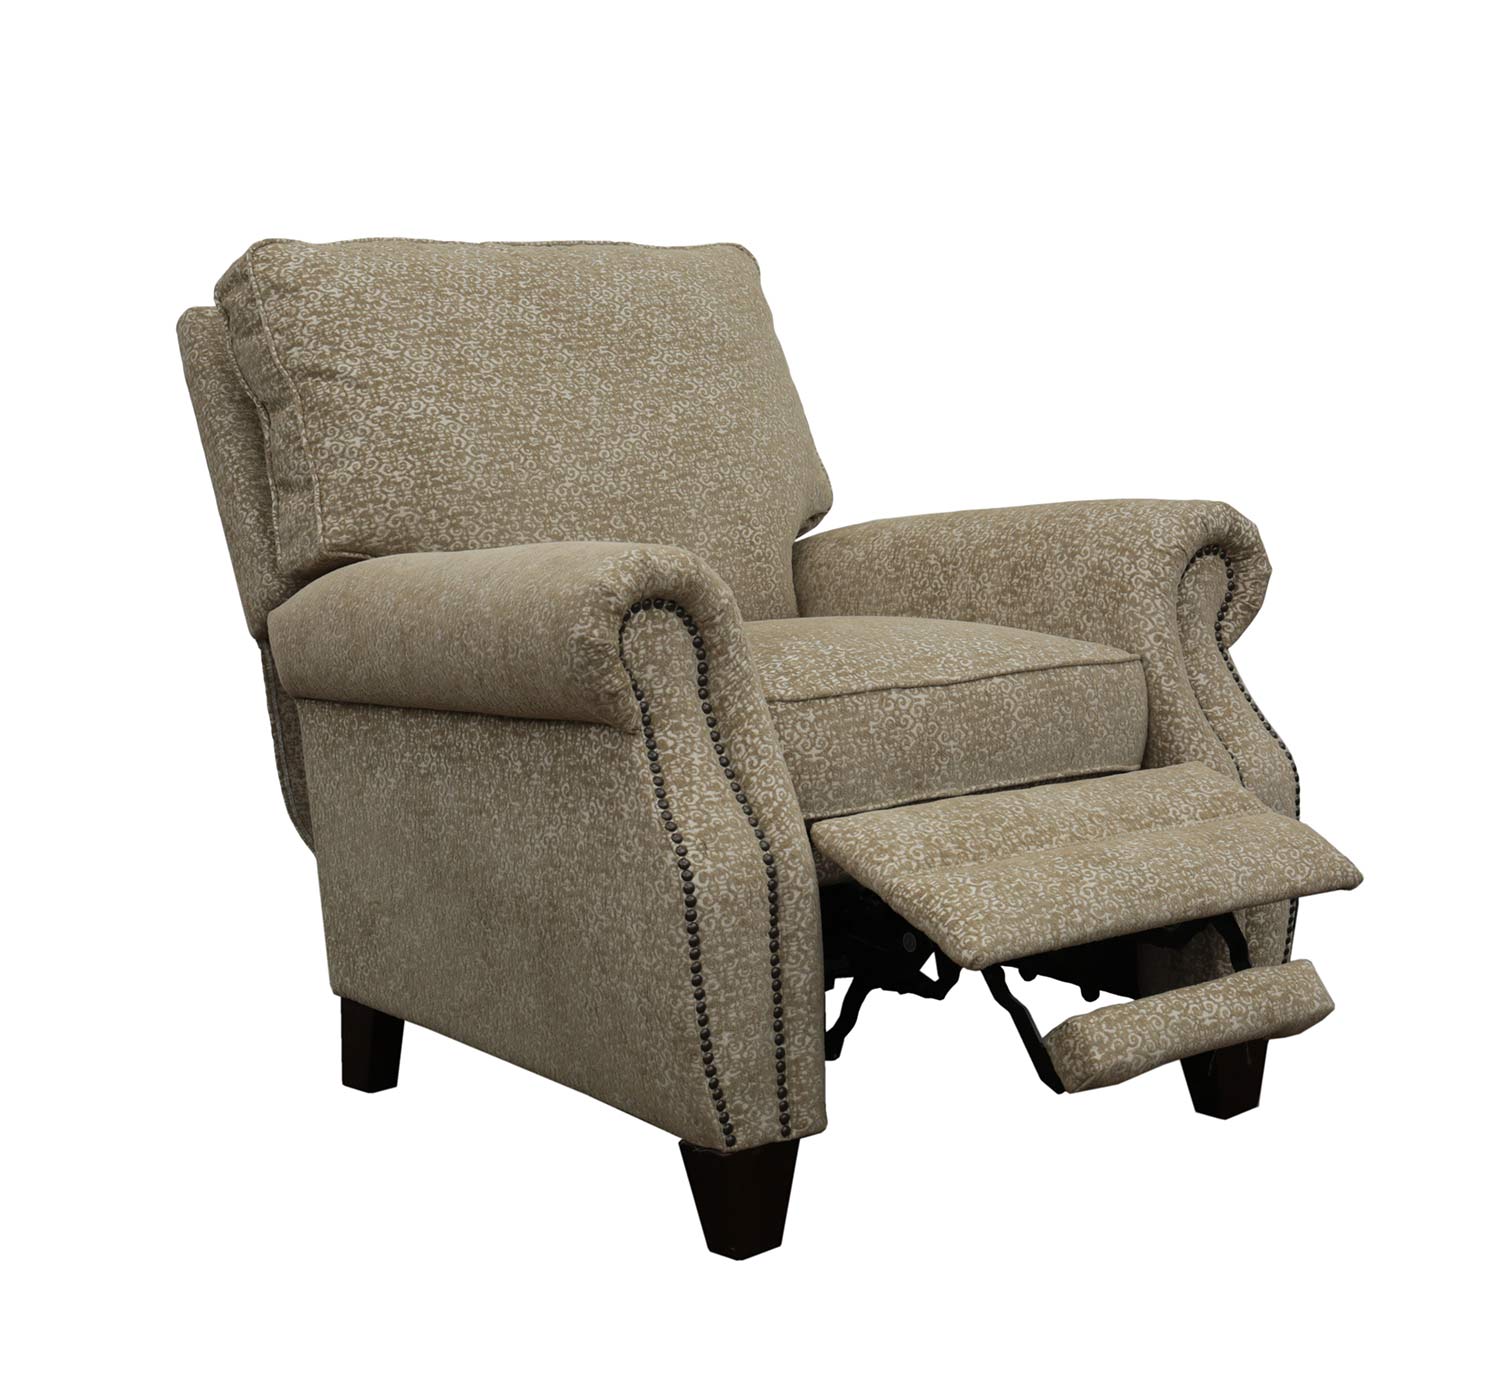 Barcalounger Briarwood Recliner Chair - Sandcastle/fabric